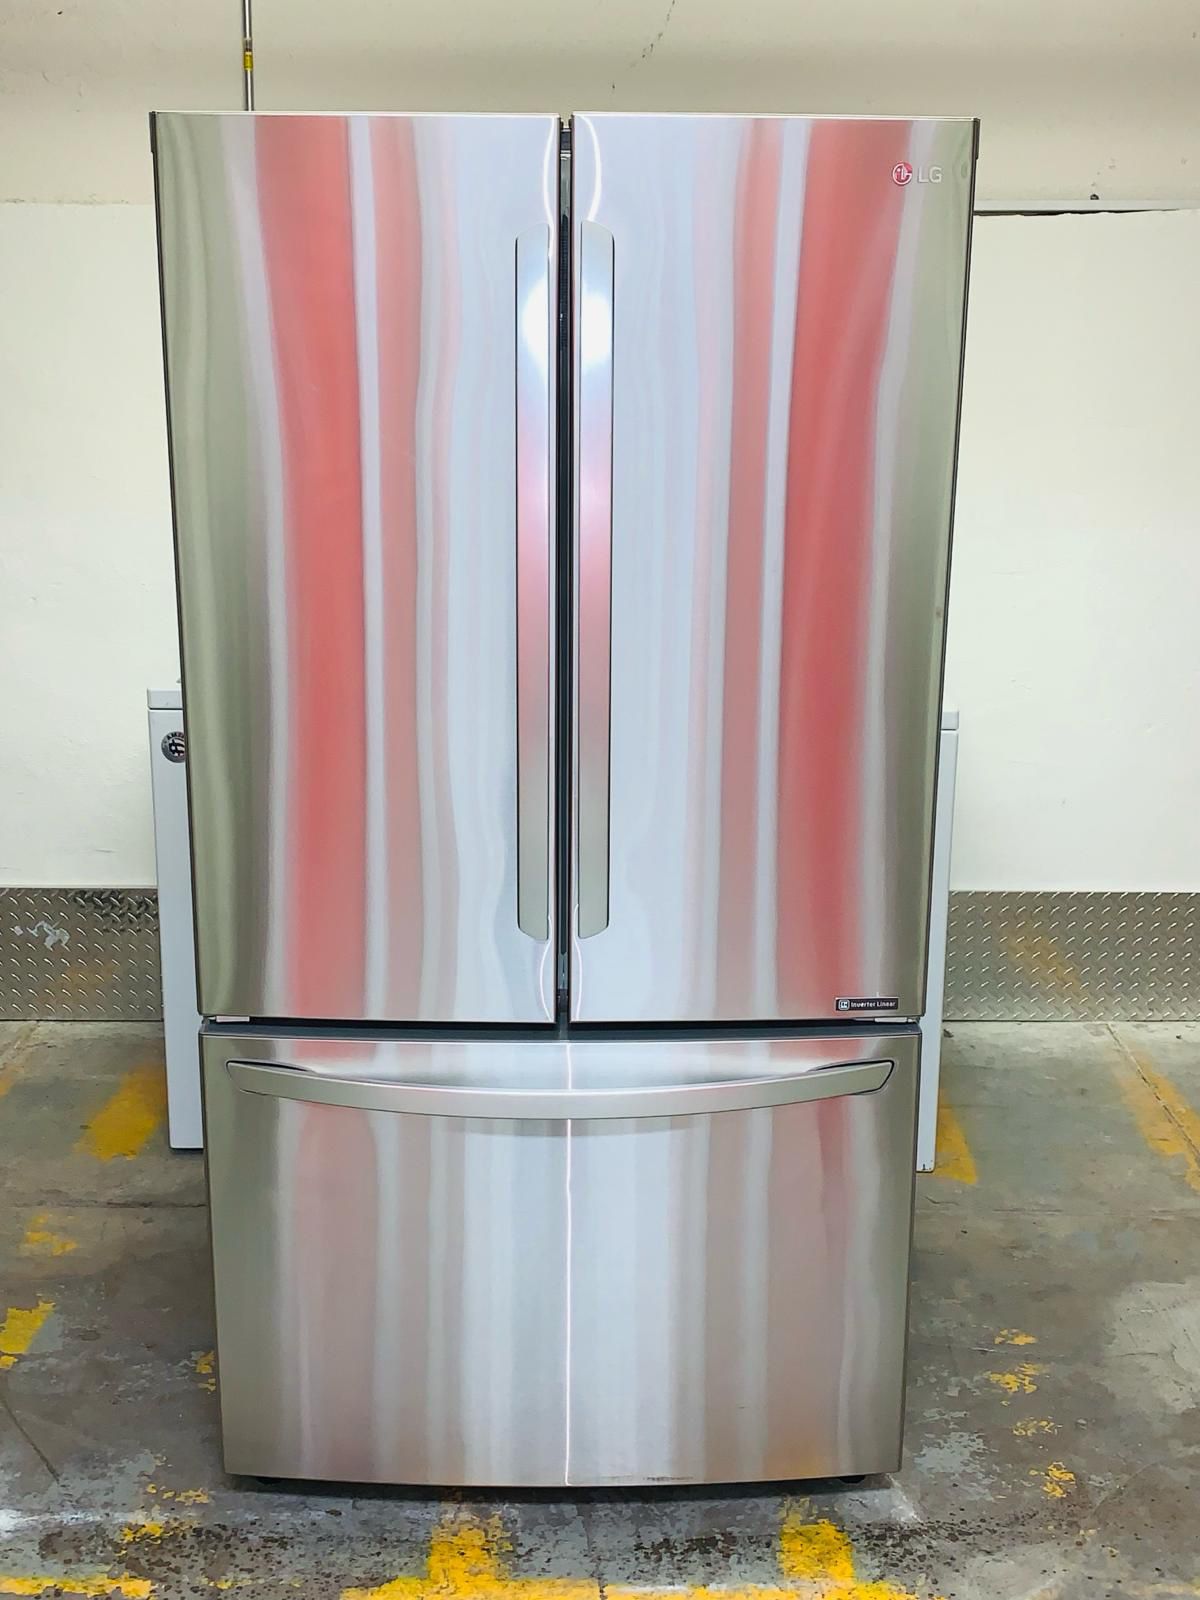 LG STAINLESS STEEL FRIDGE 36x69x29 WORKING IN EXCELLENT CONDITION WITH 90 DAY OF WARRANTY 